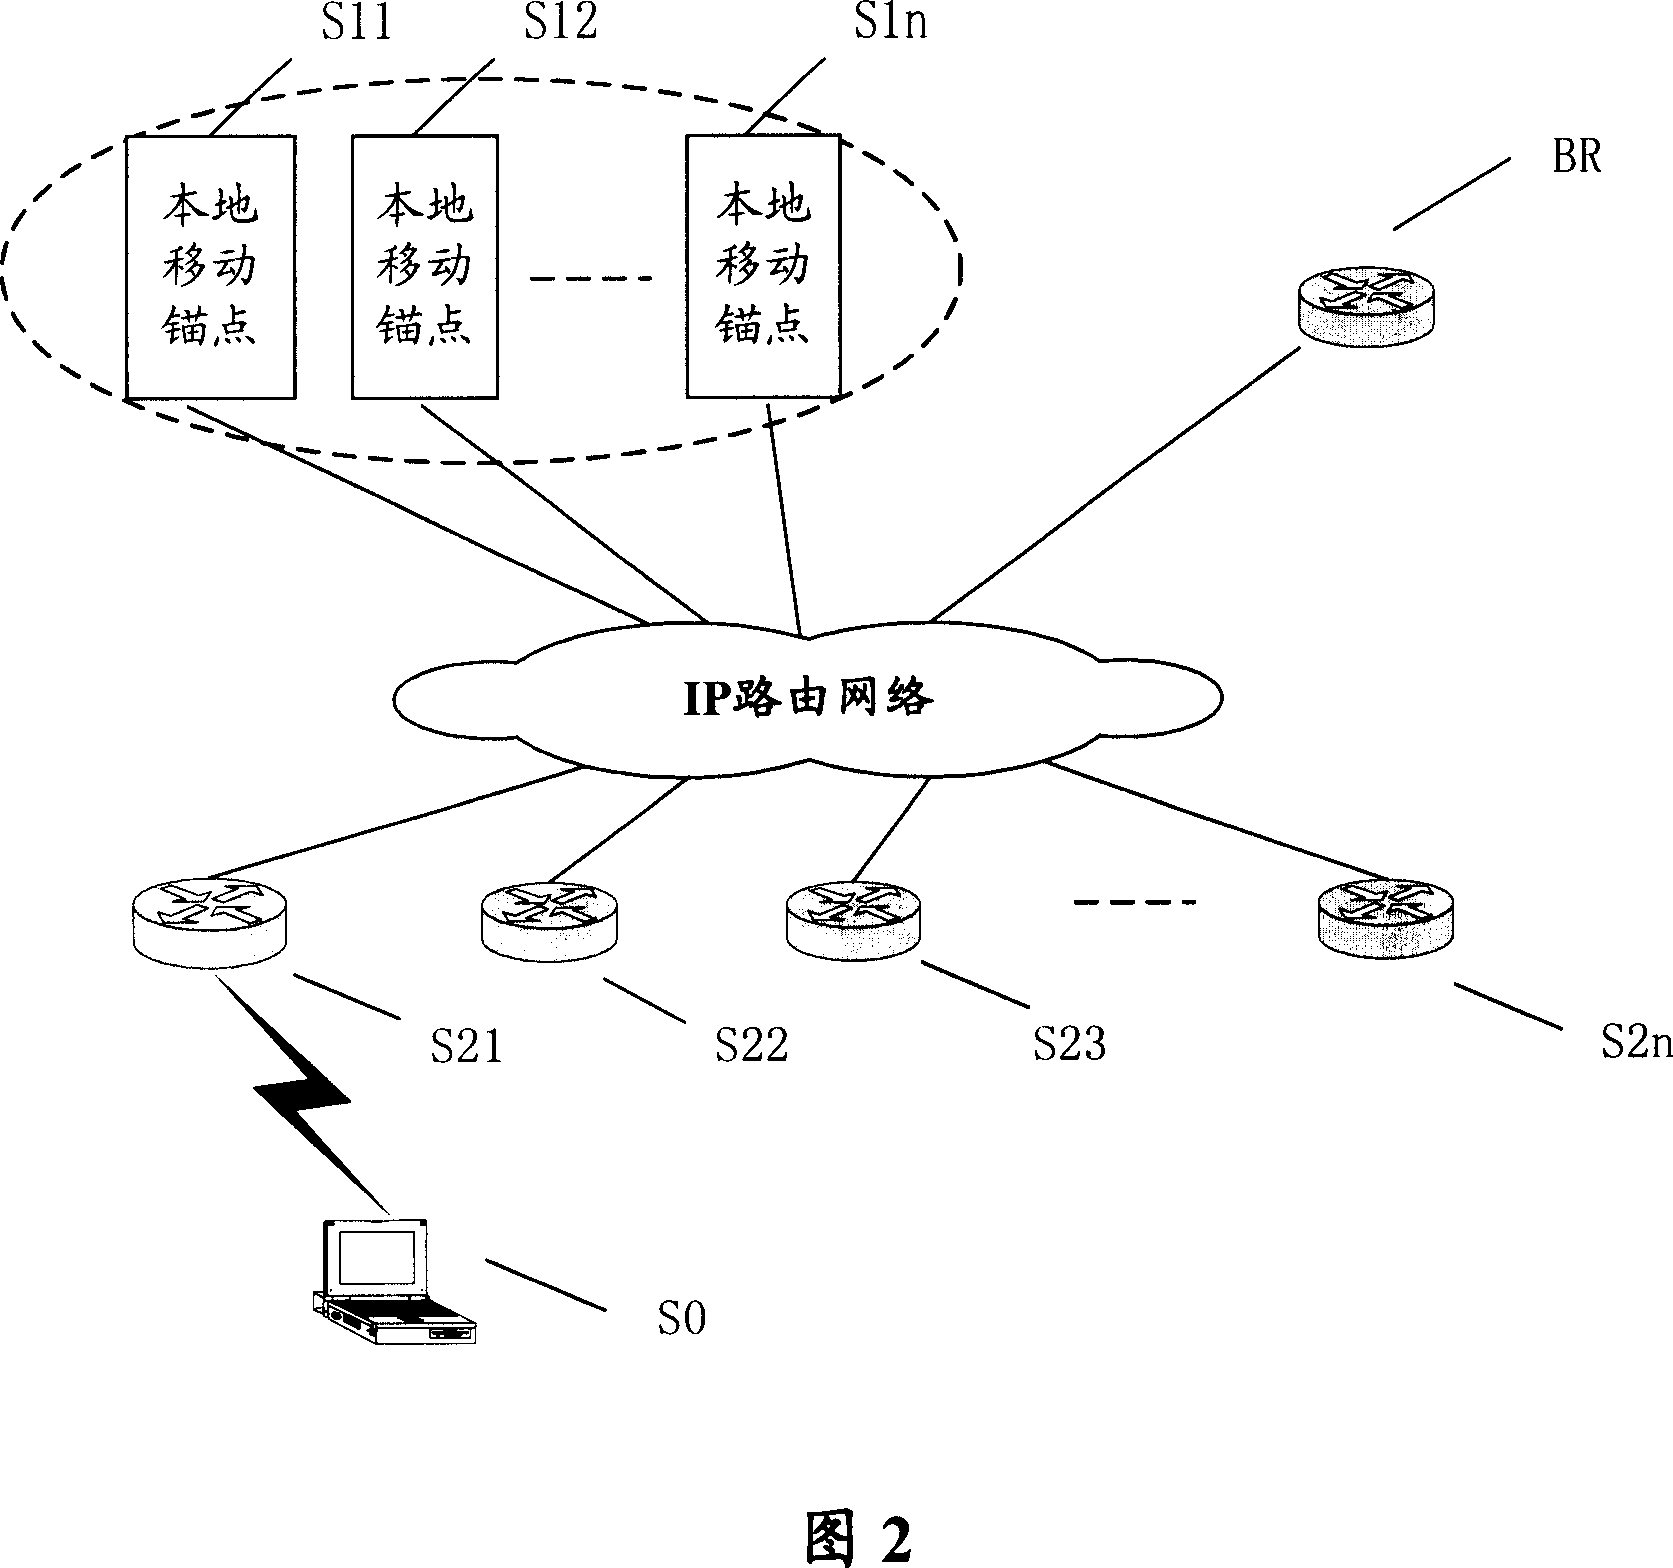 Local mobile management system and method based on network